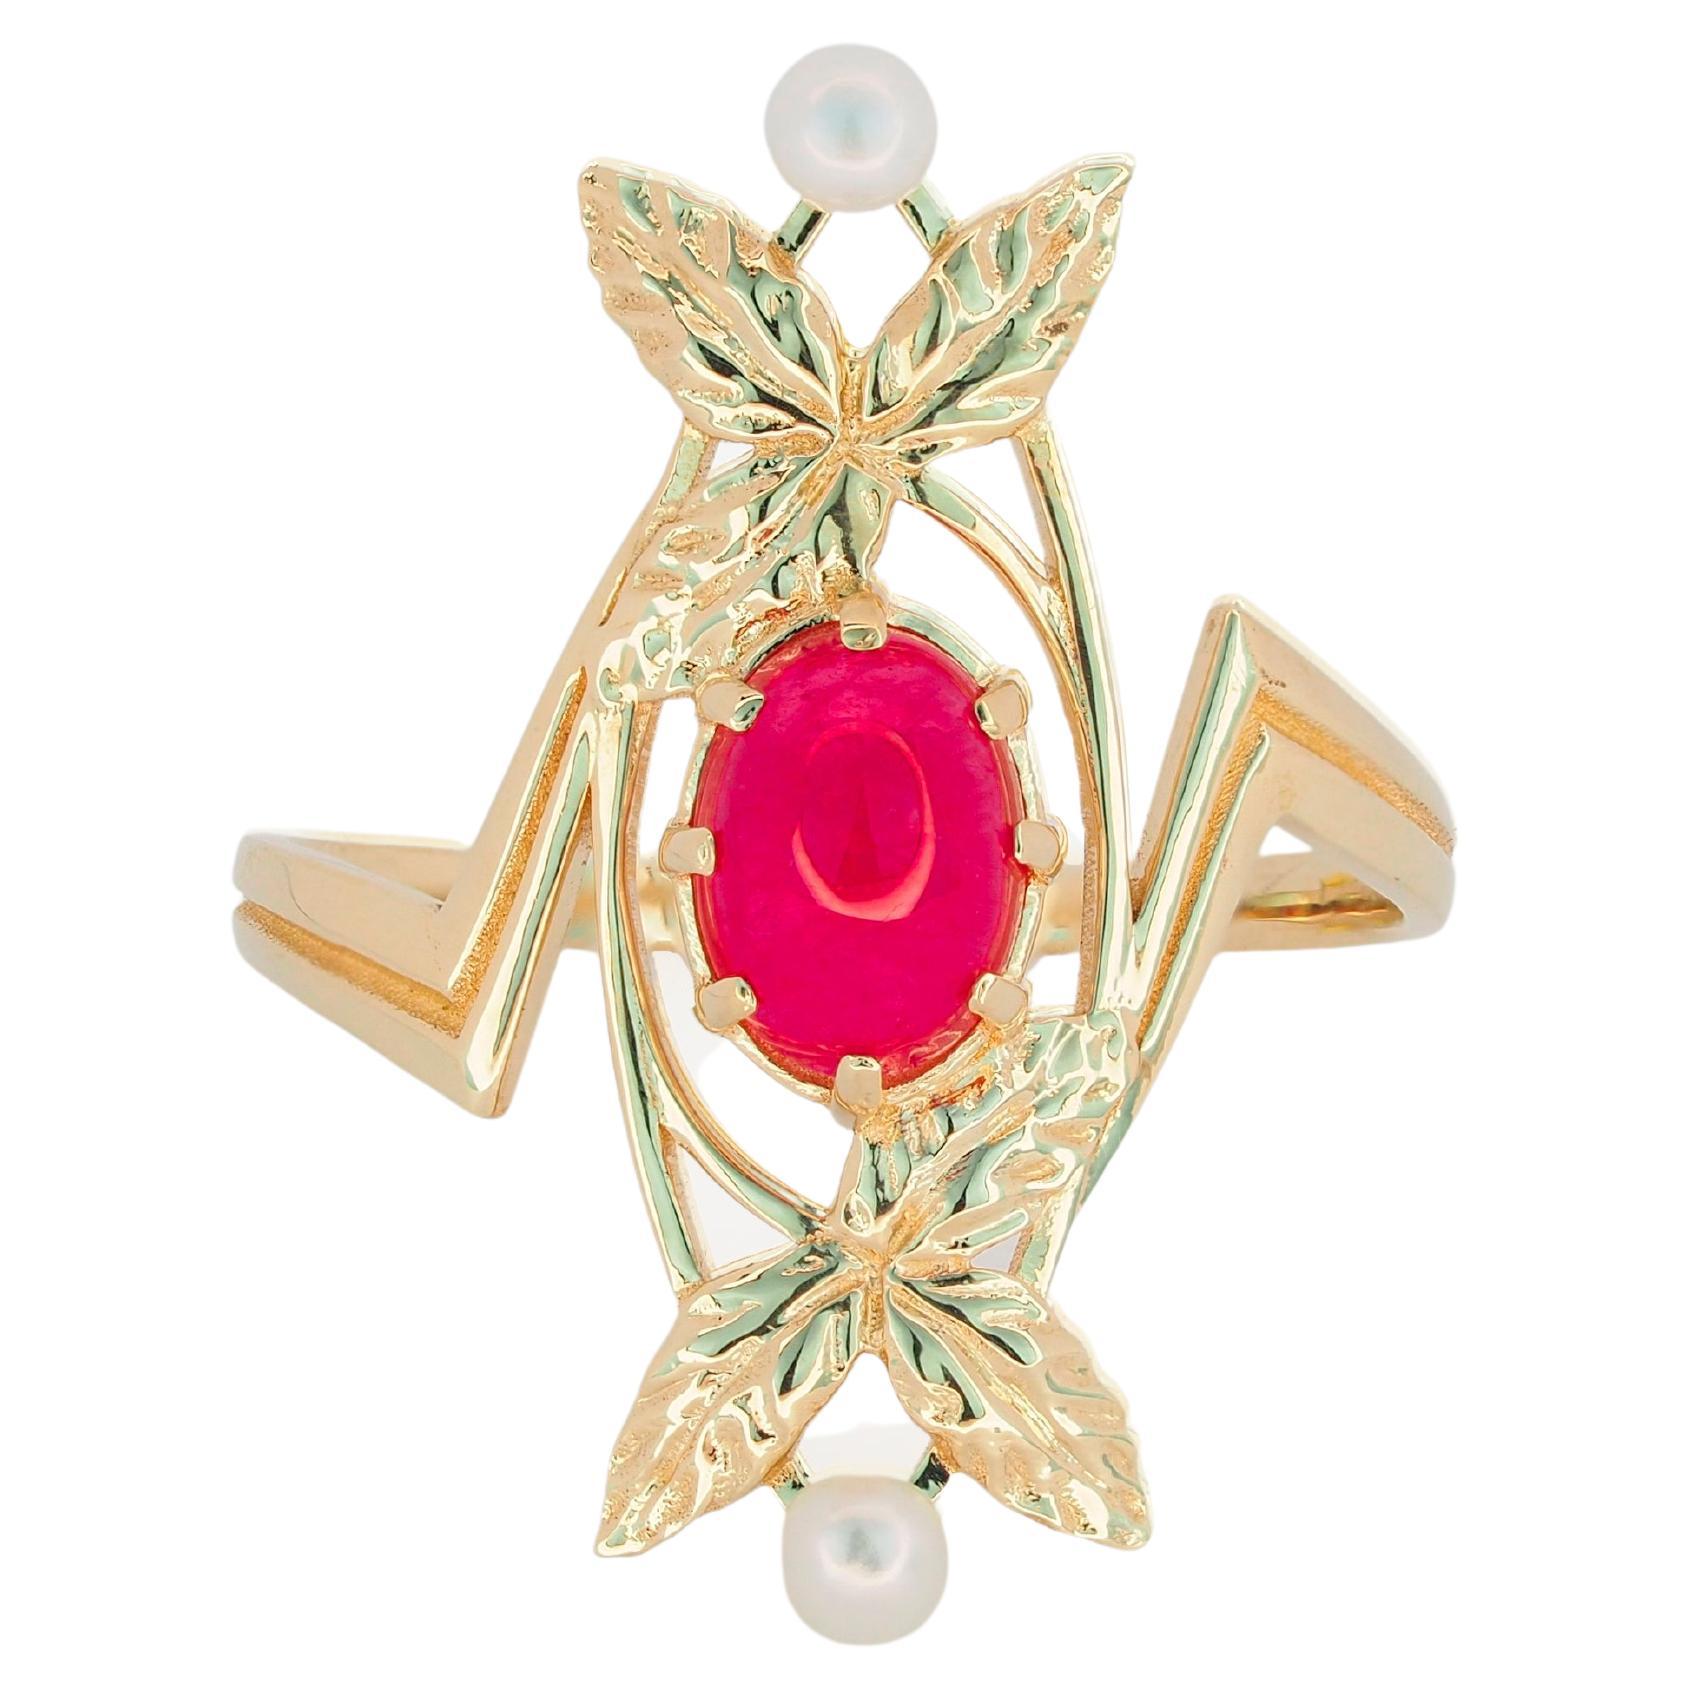 14 Karat Gold Ring with Ruby and Pearls